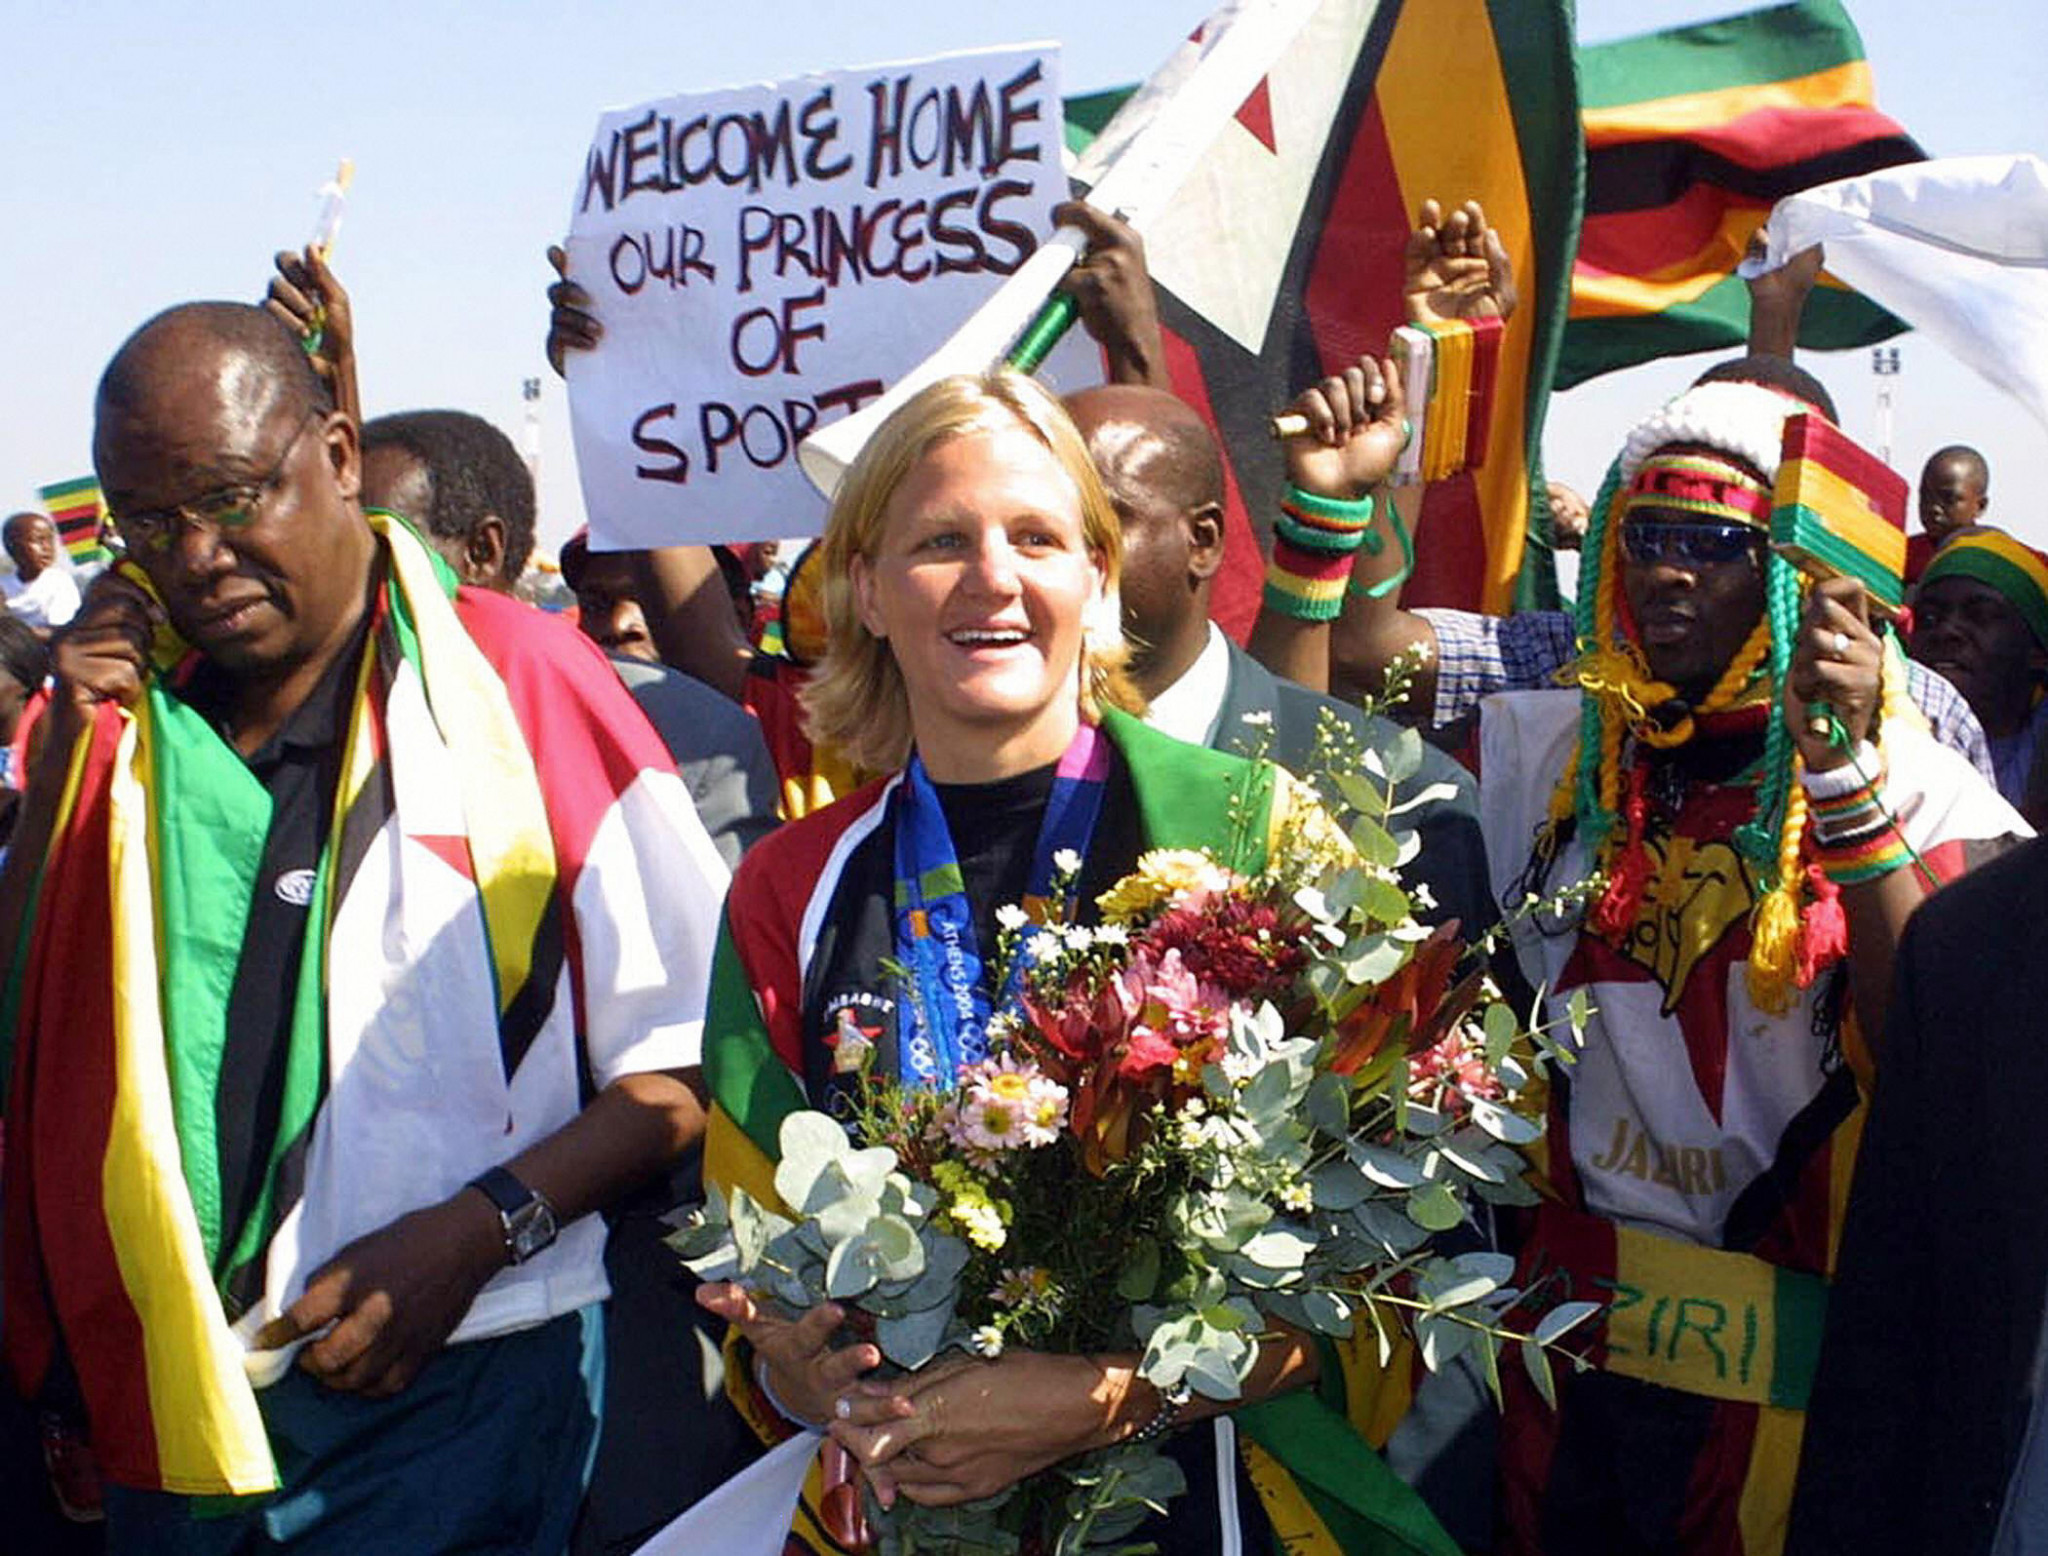 The hockey team's Olympic medal is Zimbabwe's only one not won by Kirsty Coventry ©Getty Images